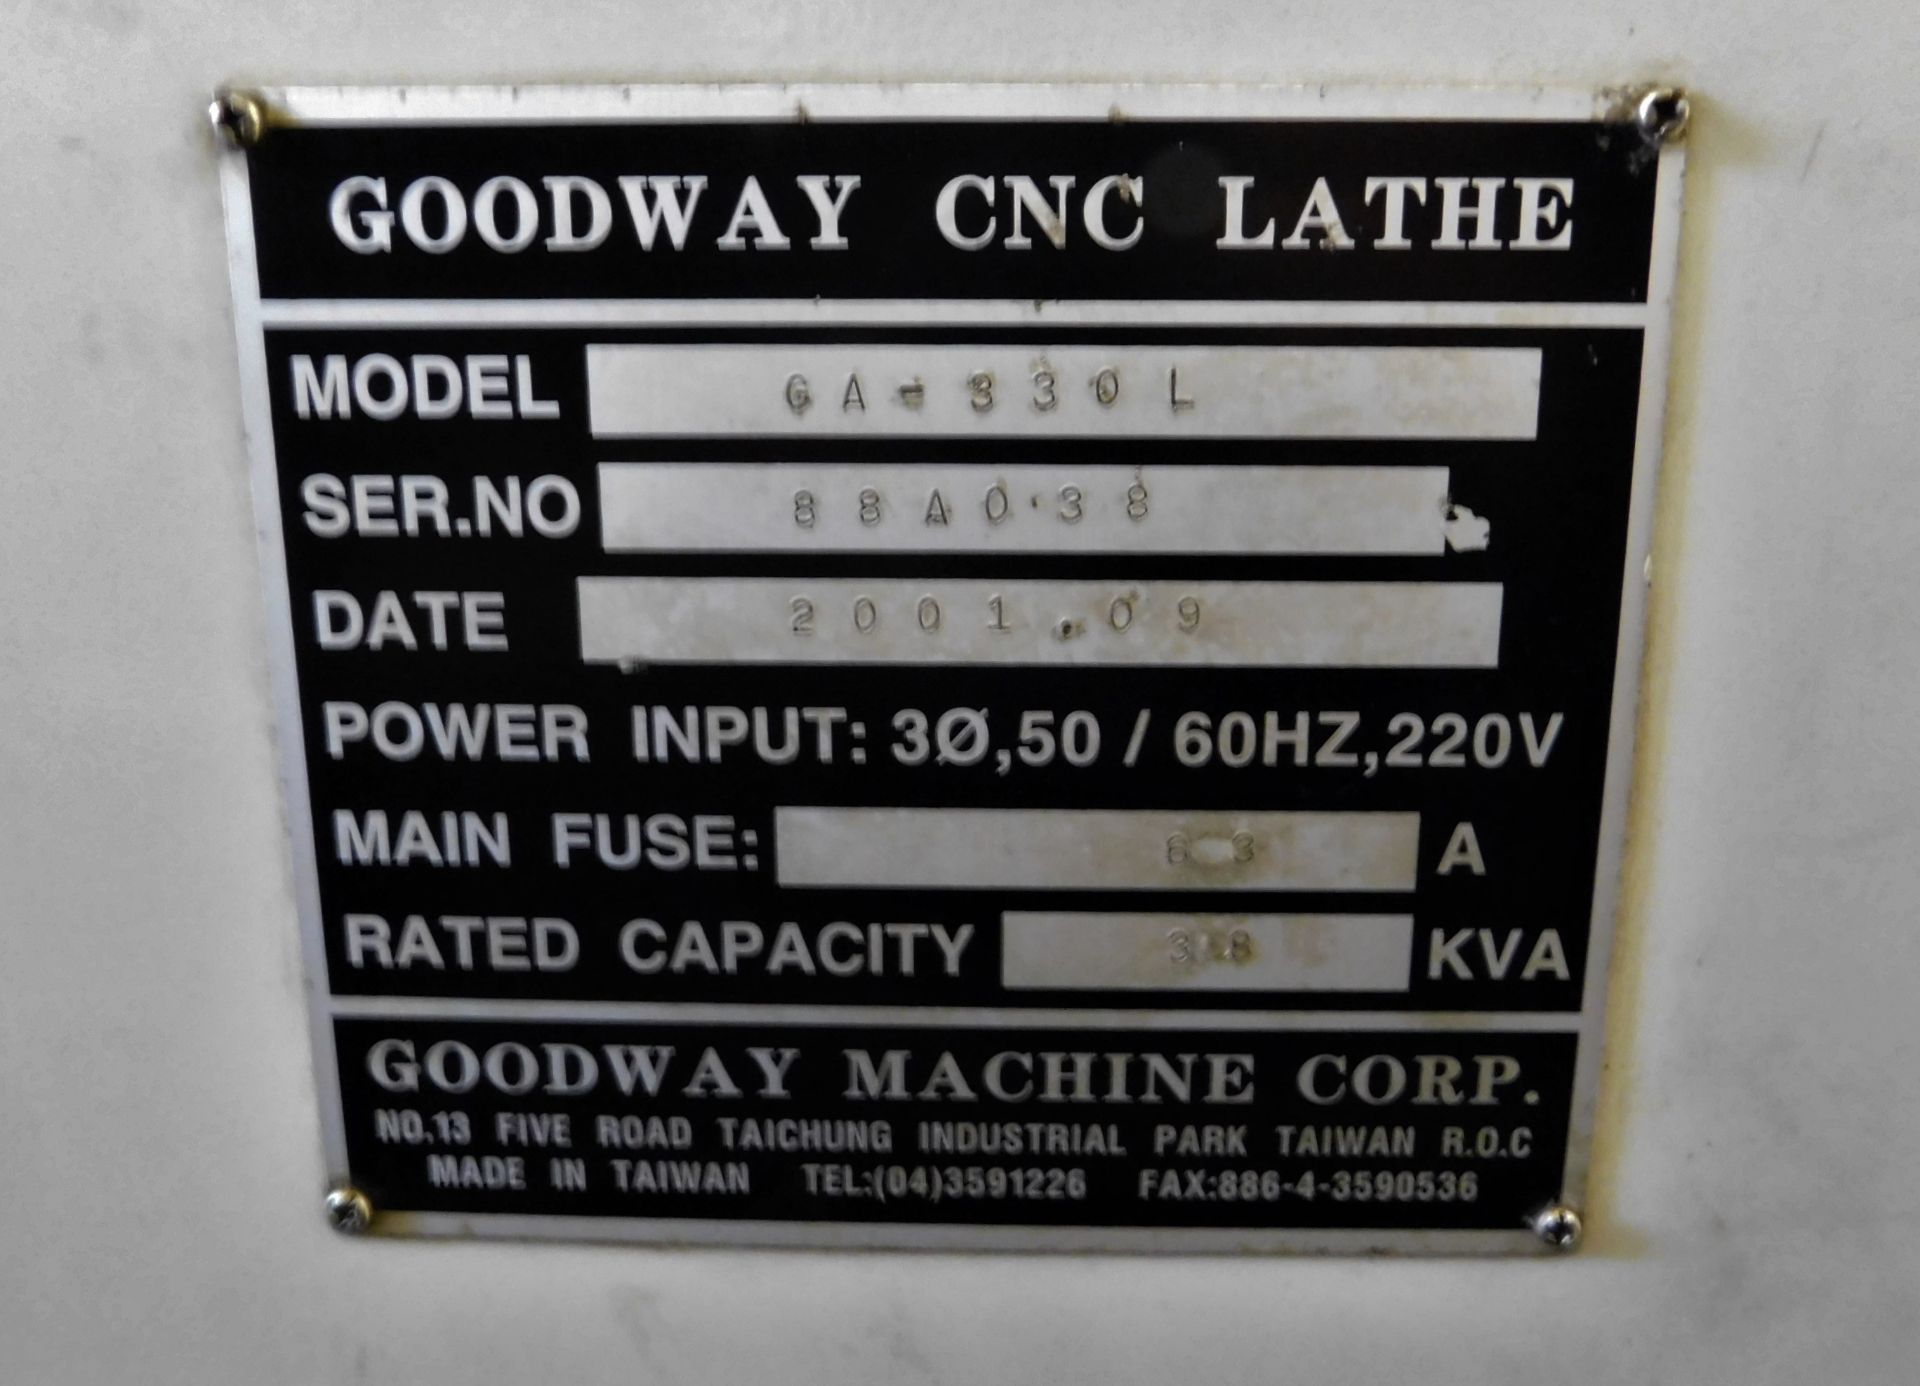 Goodway CNC Turning Centre Lathe (2001) Model No. GA330L, Serial Number 88A038 with Fanuc DRO & - Image 5 of 11